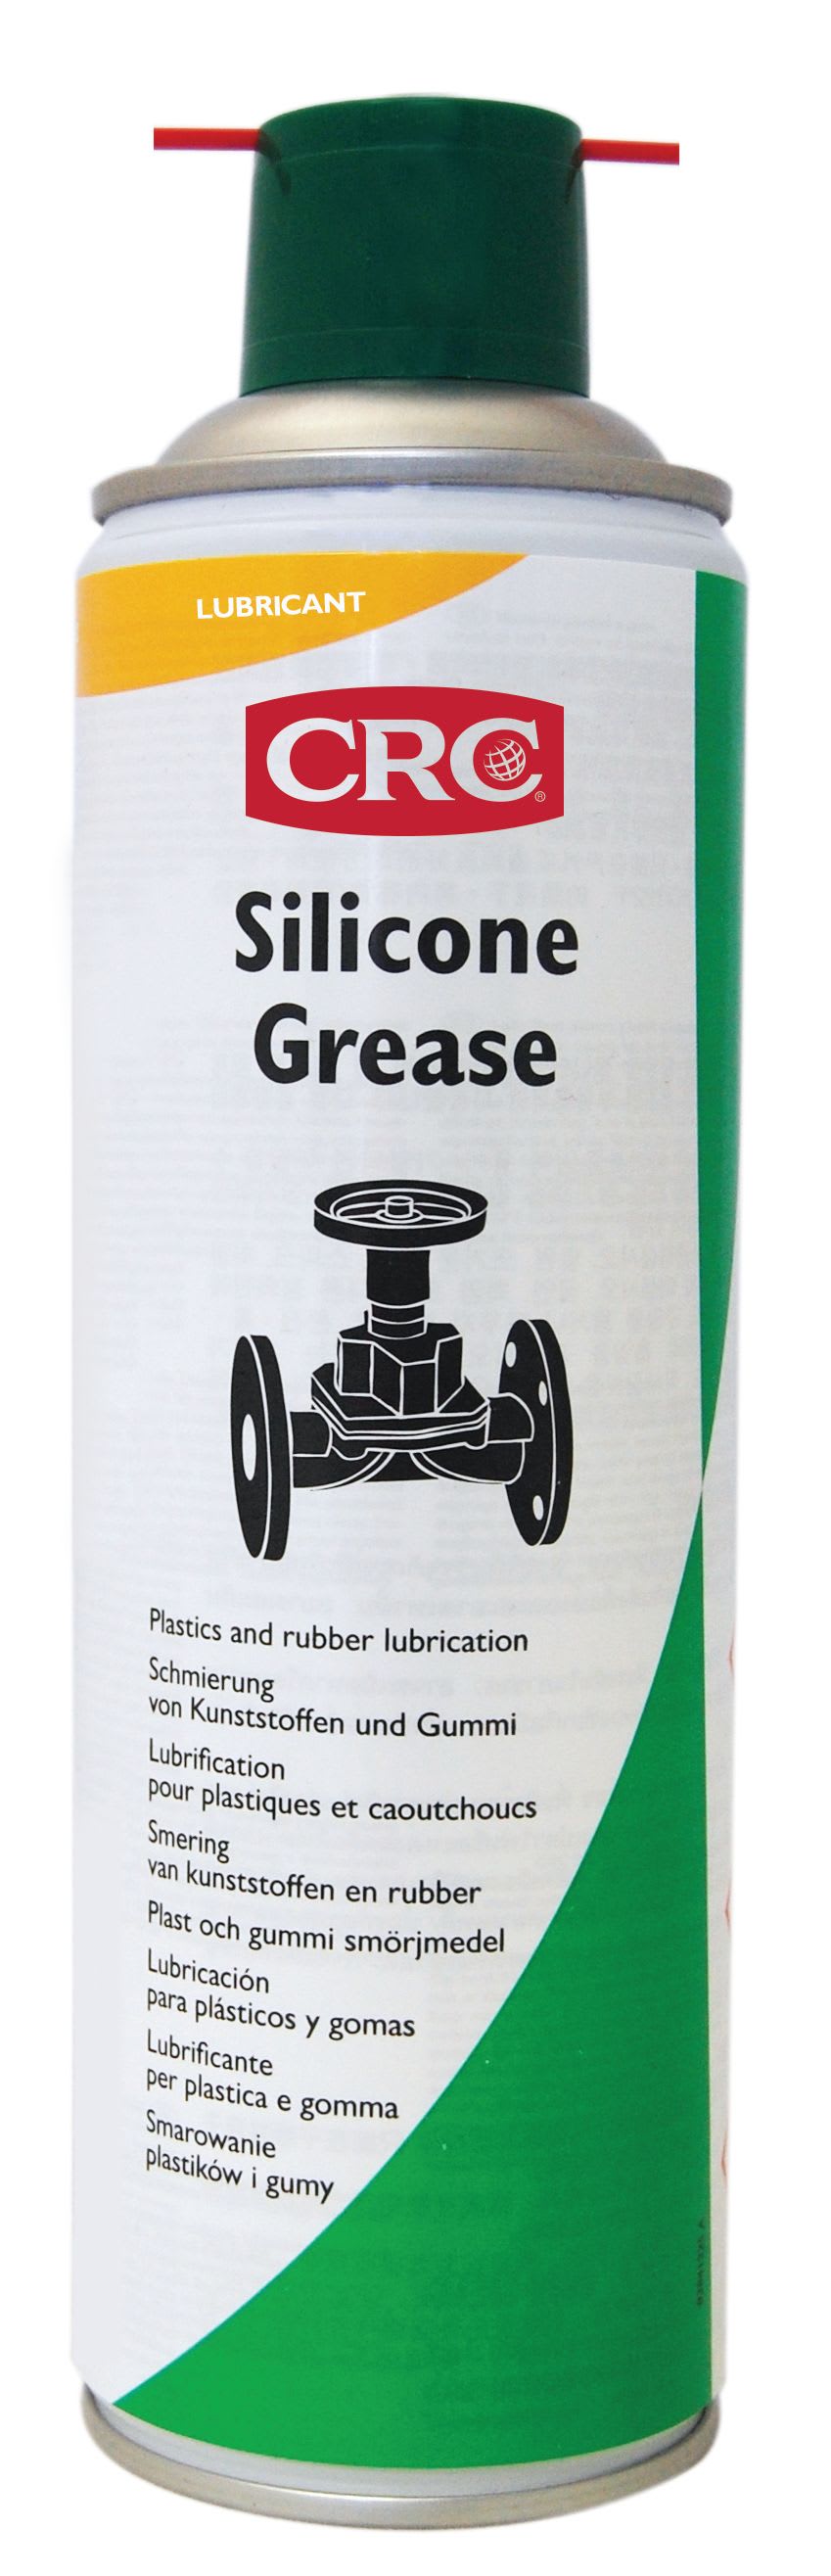 Kf - Silicone Grease 10 G